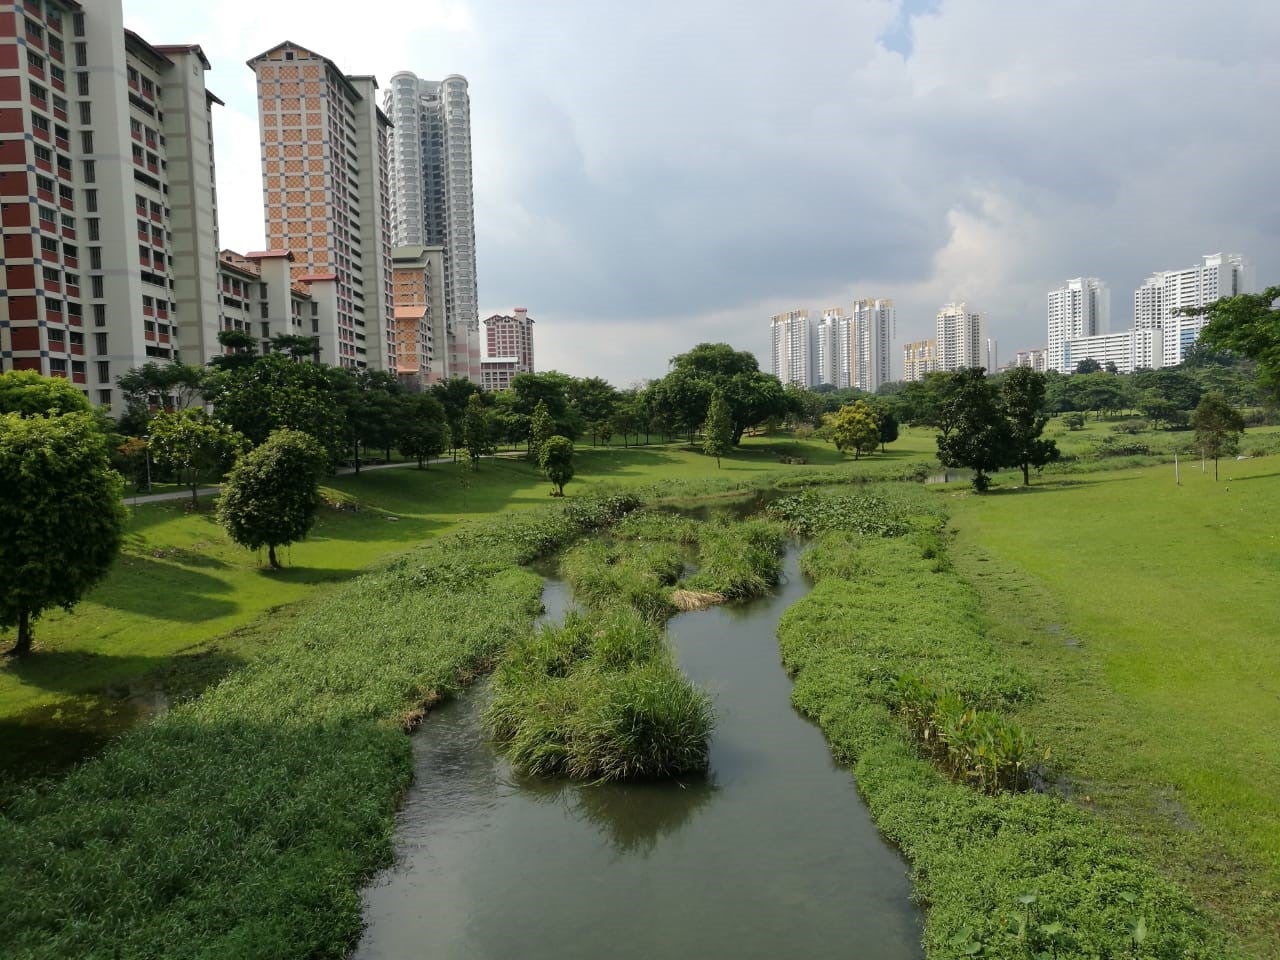 The Bishan-Ang Mo Kio Park in Singapore is a good example of a multi-purpose reservoir that transformed a concrete channel into an integrated flood risk management system with vibrant public spaces, offering recreational opportunities, children?s play spaces, green spaces, and economic opportunities for small business. Photo: Jian Vun/World Bank.